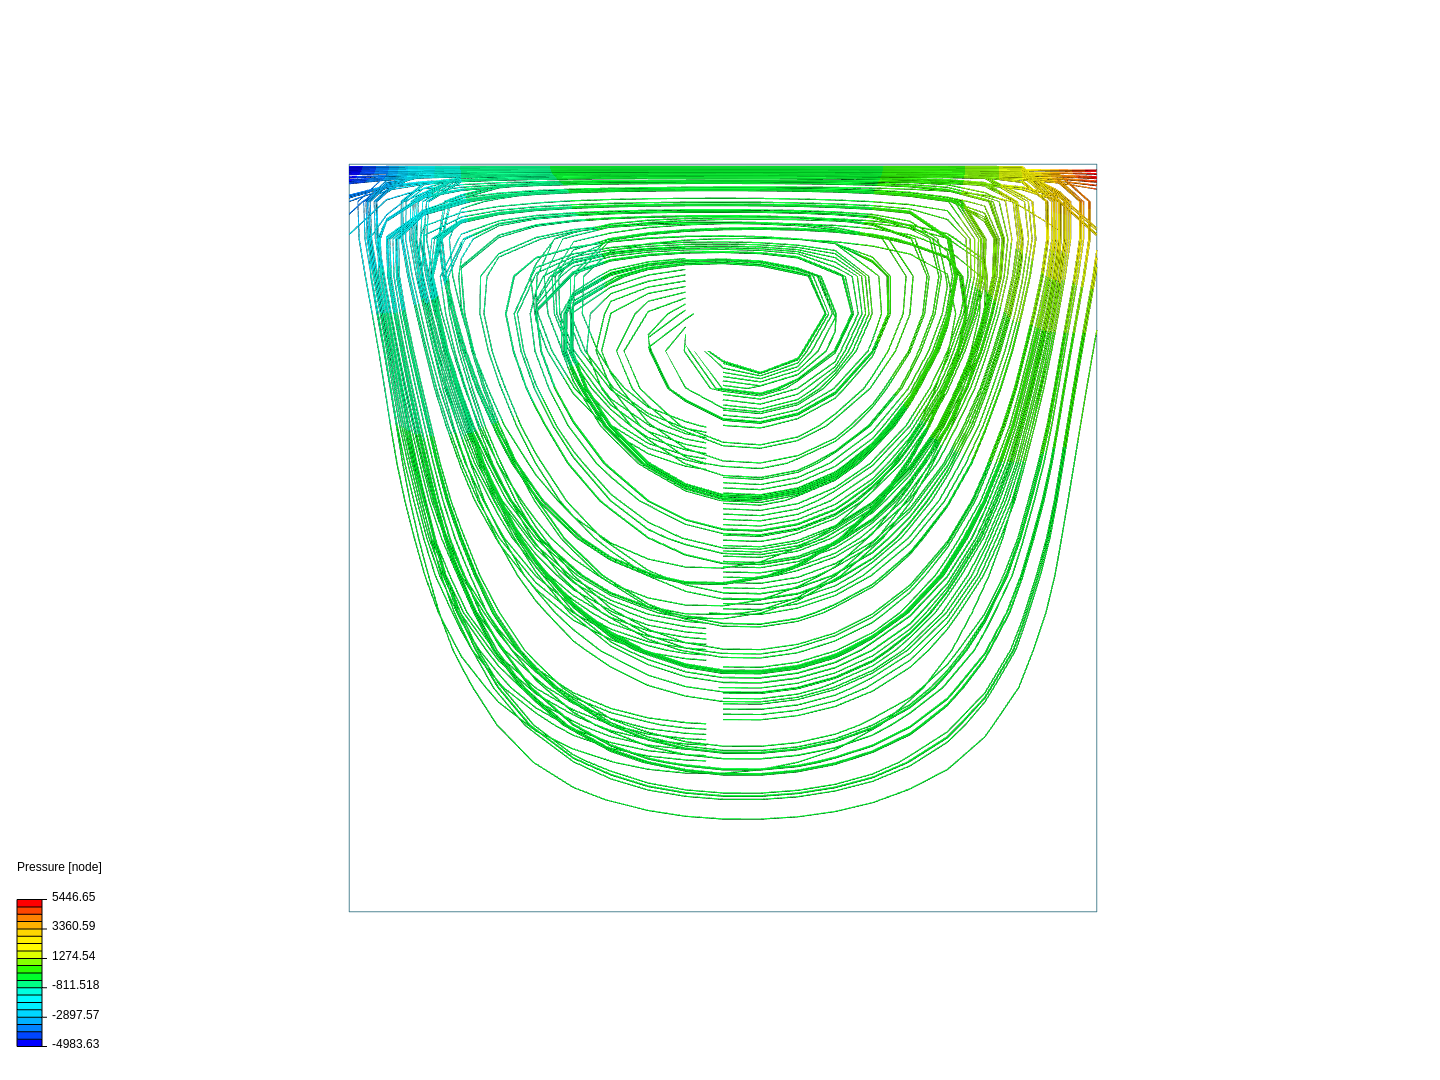 ABriefIntroductiontoCFD image